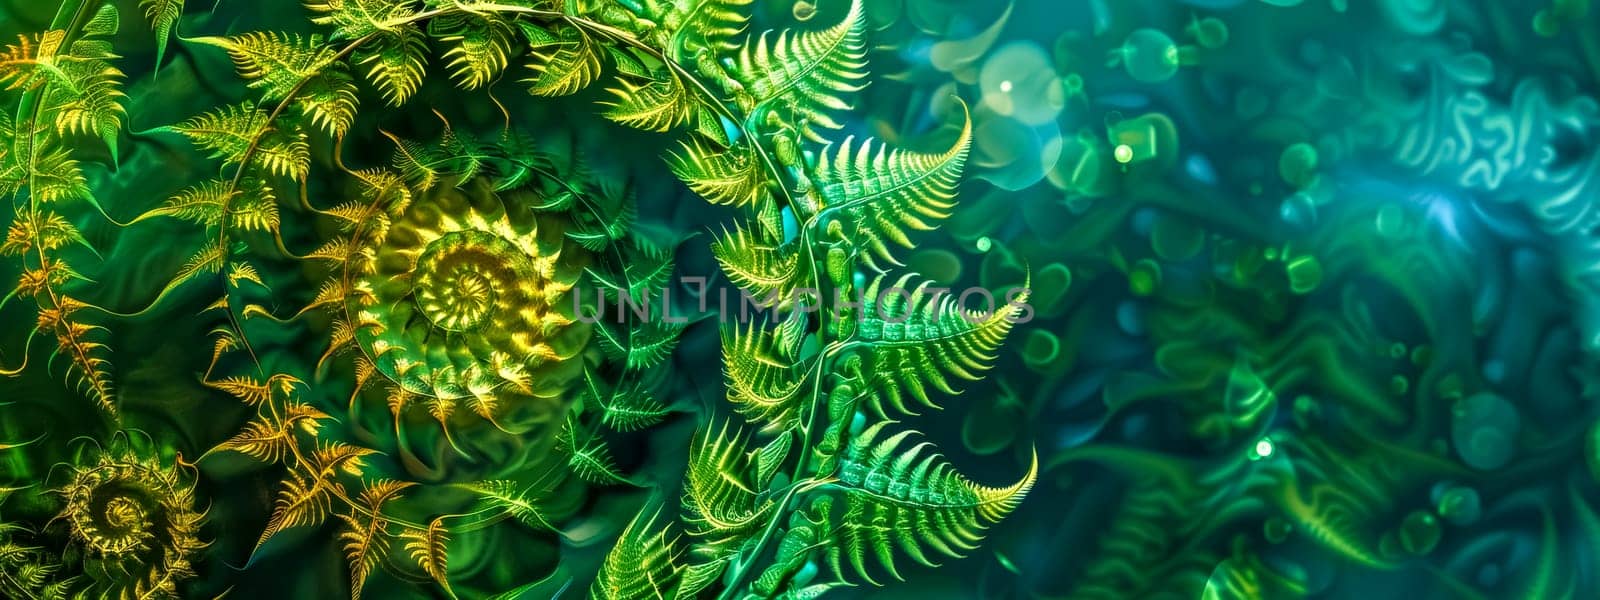 Digital art of lush fern leaves with sparkling bokeh effects in vibrant green hues